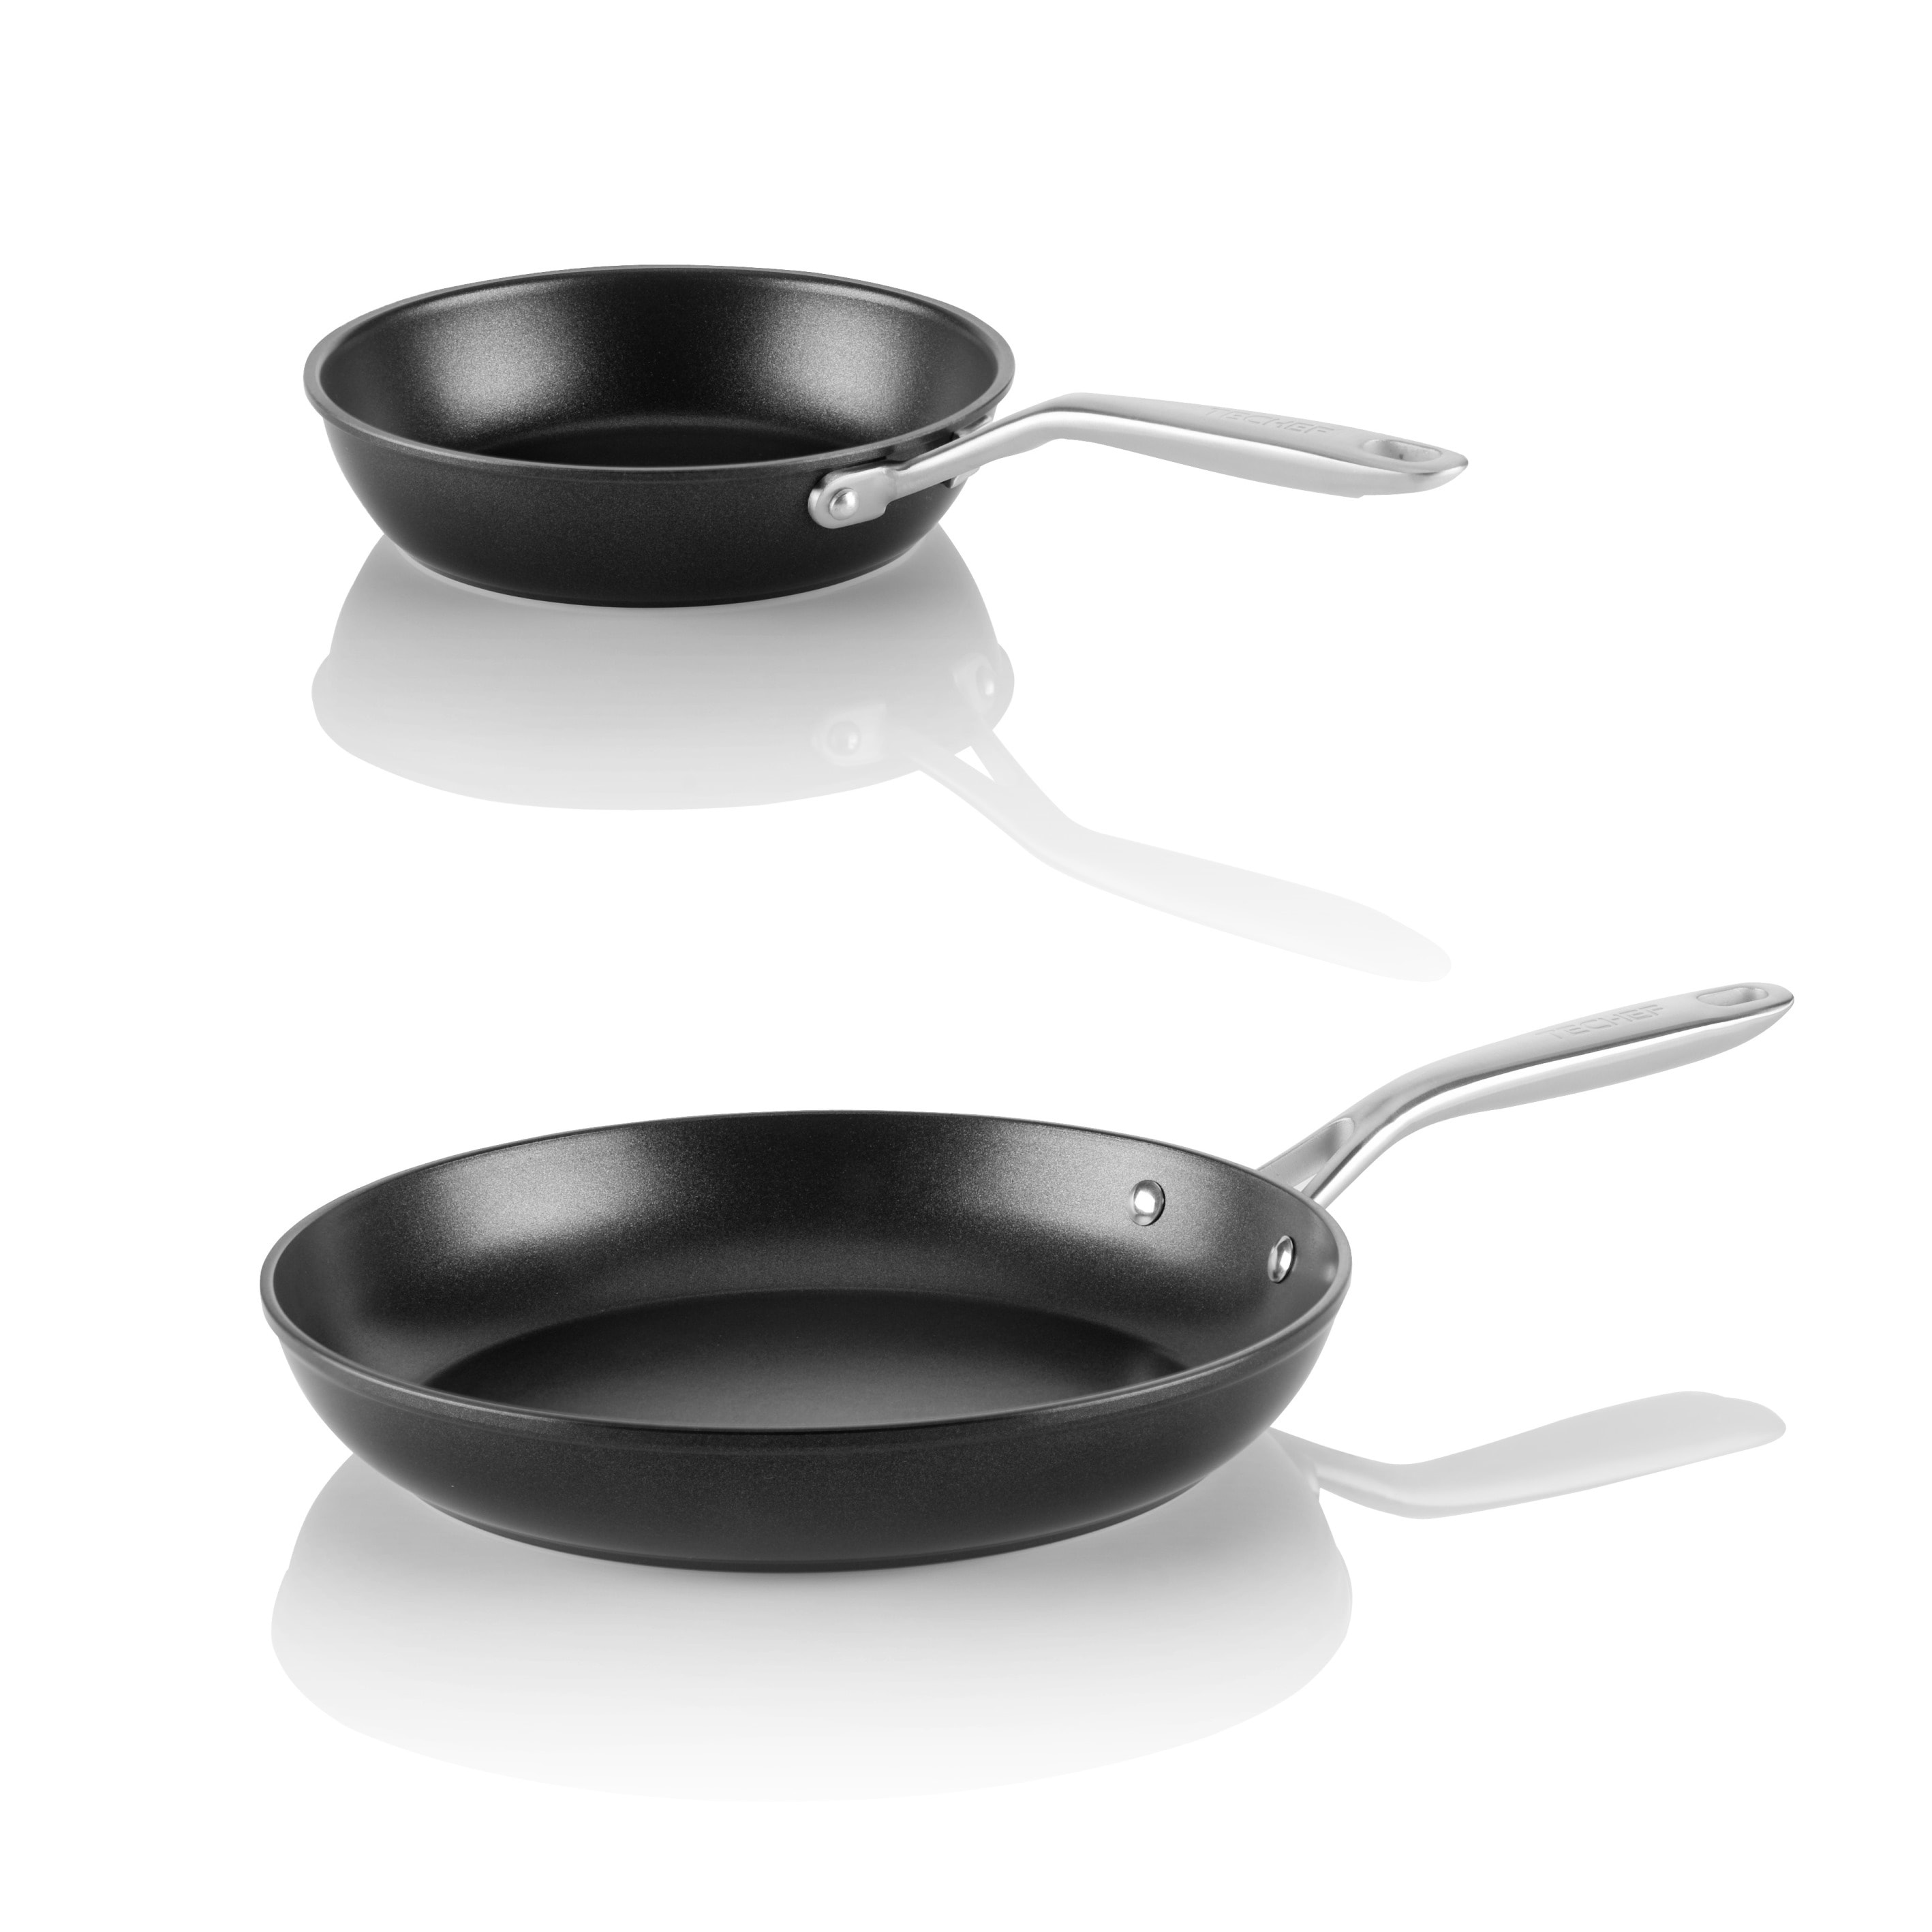 https://ak1.ostkcdn.com/images/products/is/images/direct/fbcea52af080c714ef3aed4568e1e4f8aecbe637/Onyx-Collection---8-and-12-Inch-Frying-Pan-Set.jpg